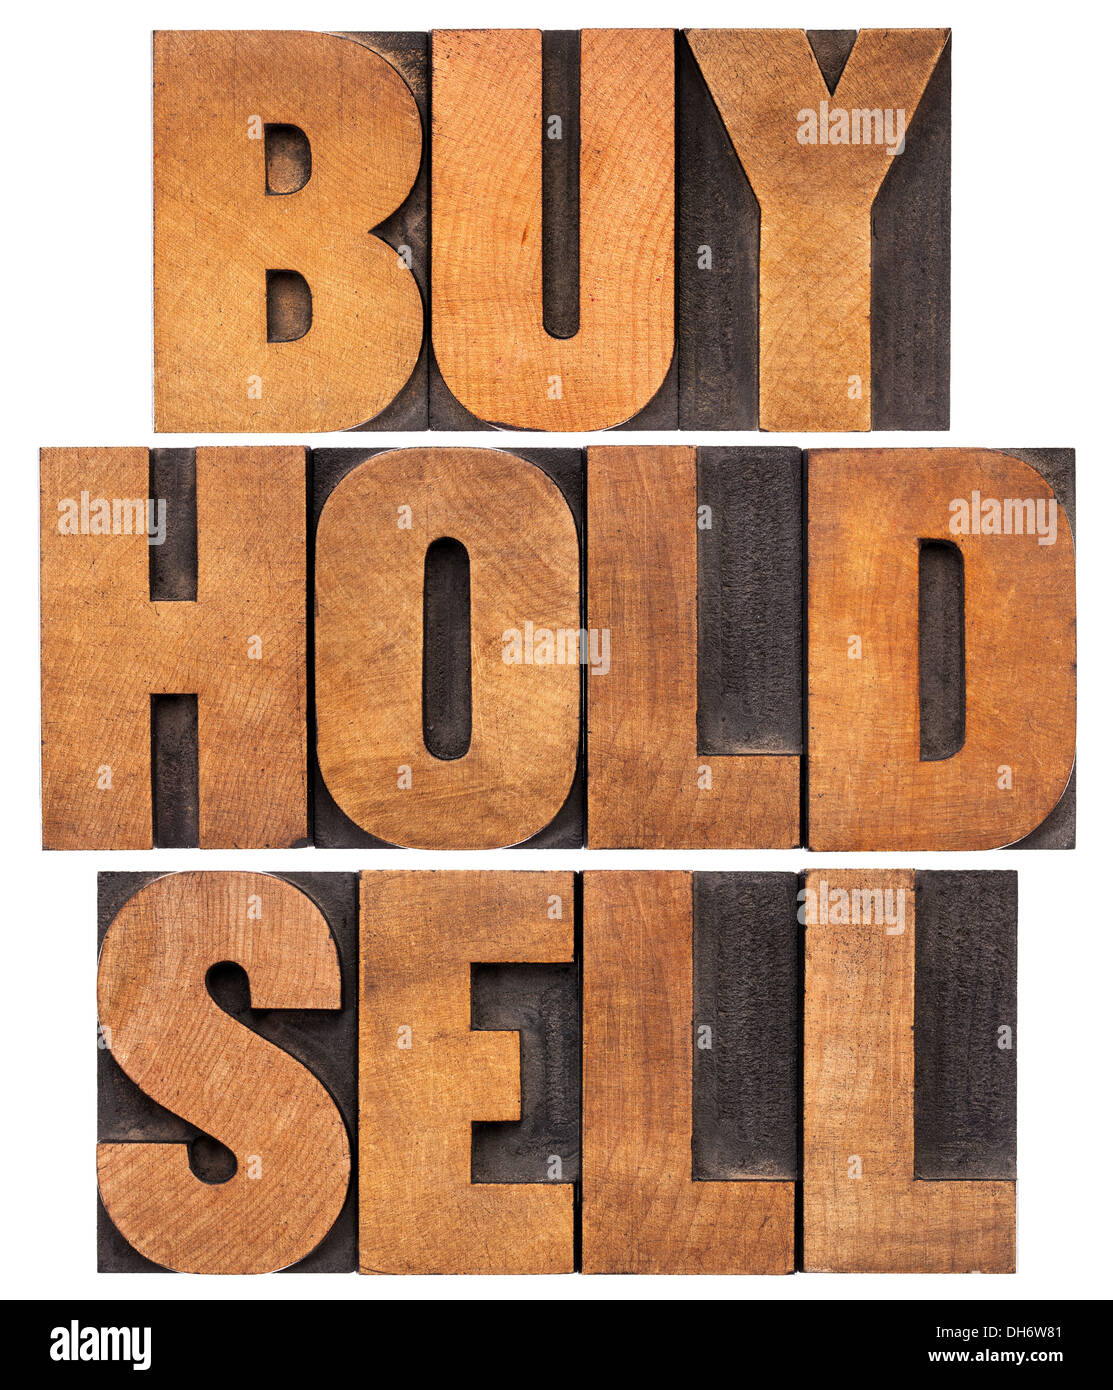 buy, hold, sell - investing concept - isolated words in vintage letterpress wood type Stock Photo